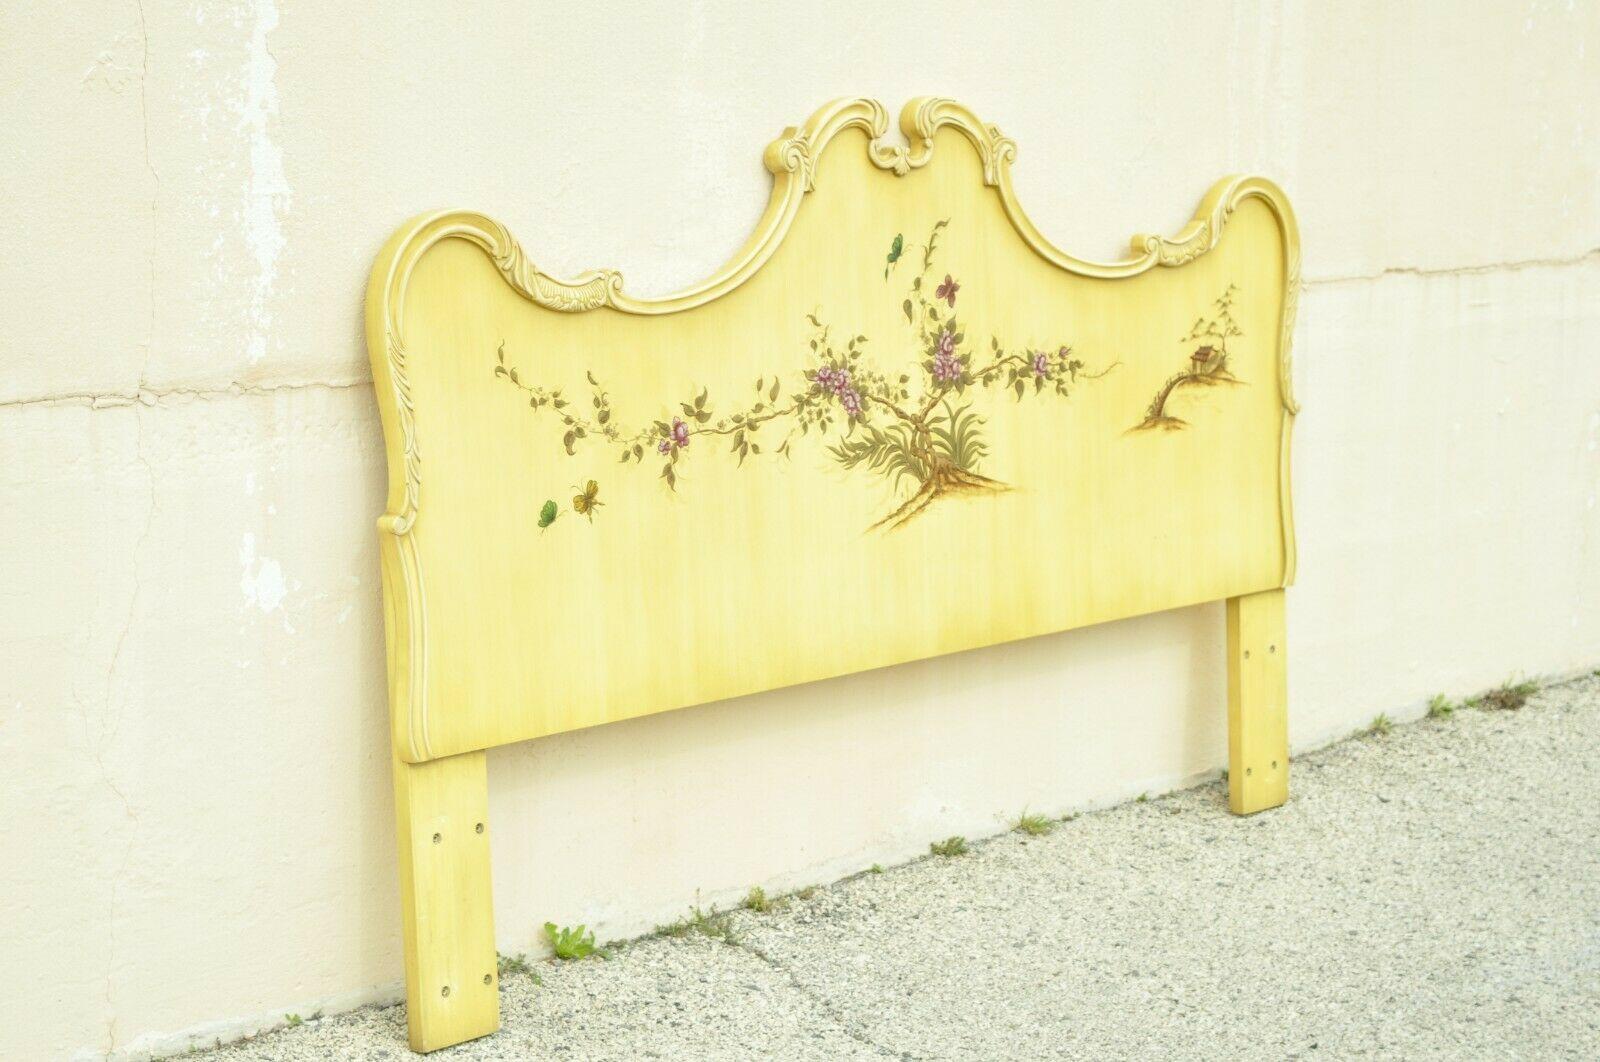 Union National yellow Chinoiserie paint decorated lacquer king size bed headboard. Item features impressive king size frame, yellow lacquer finish with chinoiserie decoration, original label, quality American craftsmanship, great style and form.